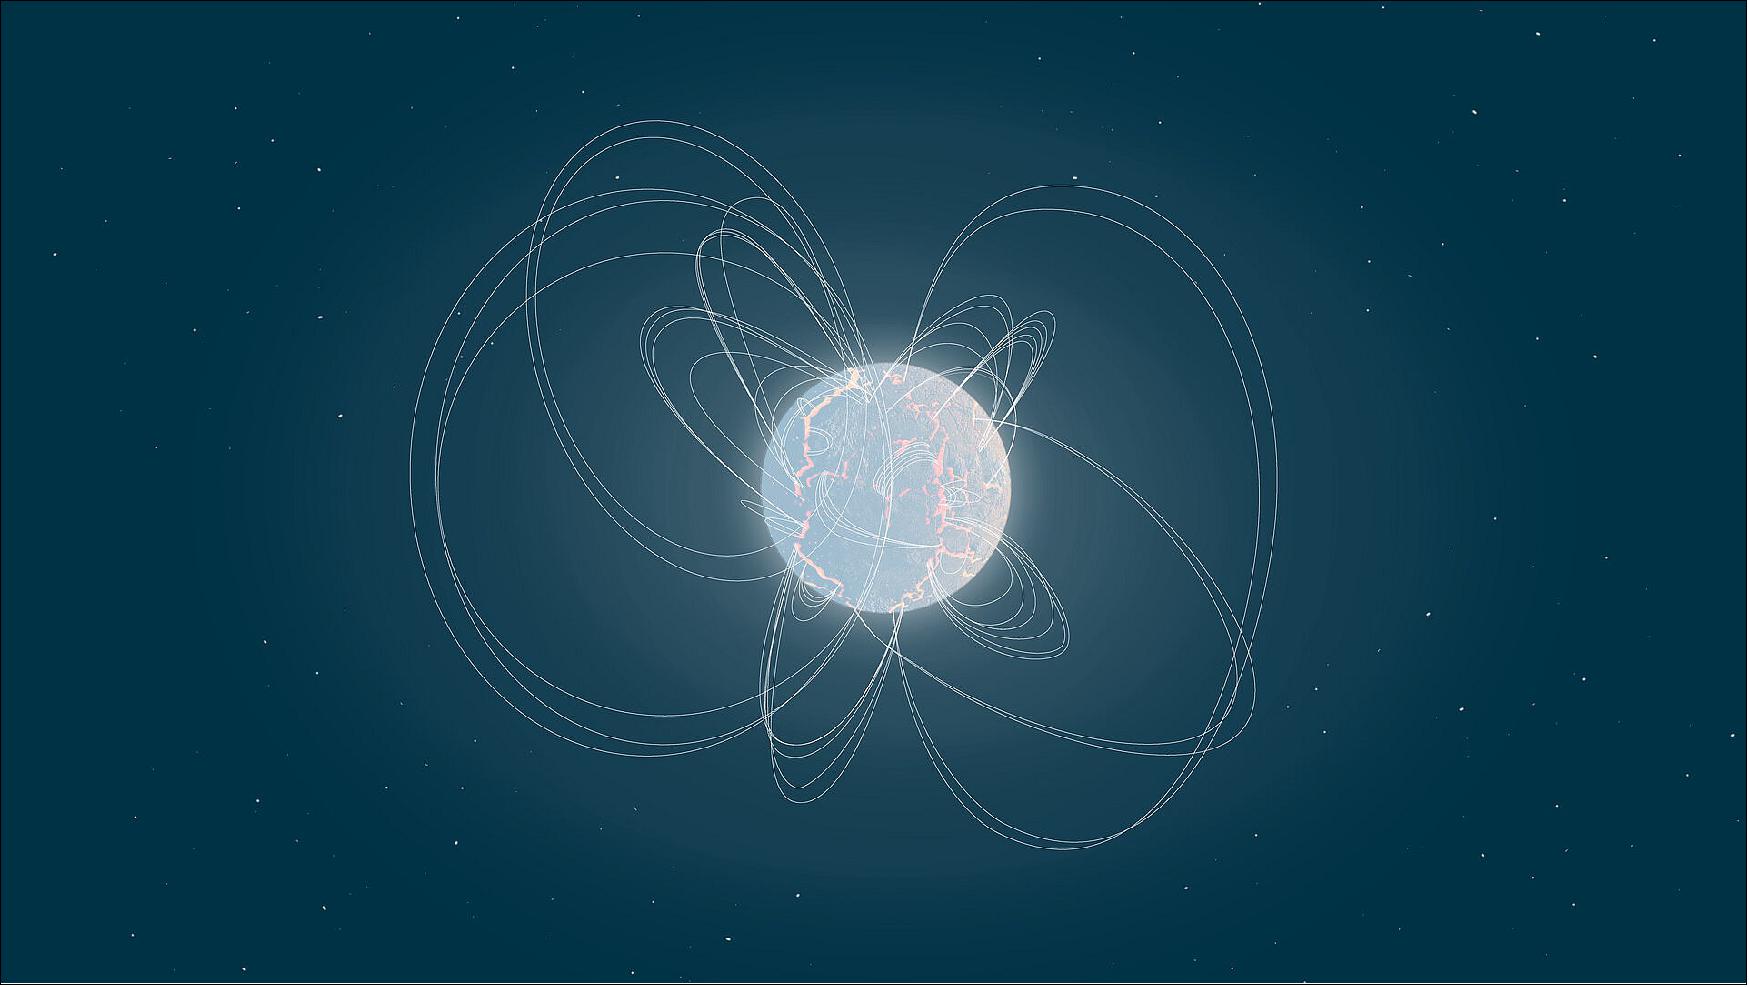 Figure 11: Artist's impression of a magnetar. Magnetars are the cosmic objects with the strongest magnetic fields ever measured in the Universe. They are extremely magnetised pulsars – the hot and dense remnants of massive stars that throw off energetic radiation in impulsive bursts and longer outbursts on timescales from milliseconds to years (image credit: ESA)